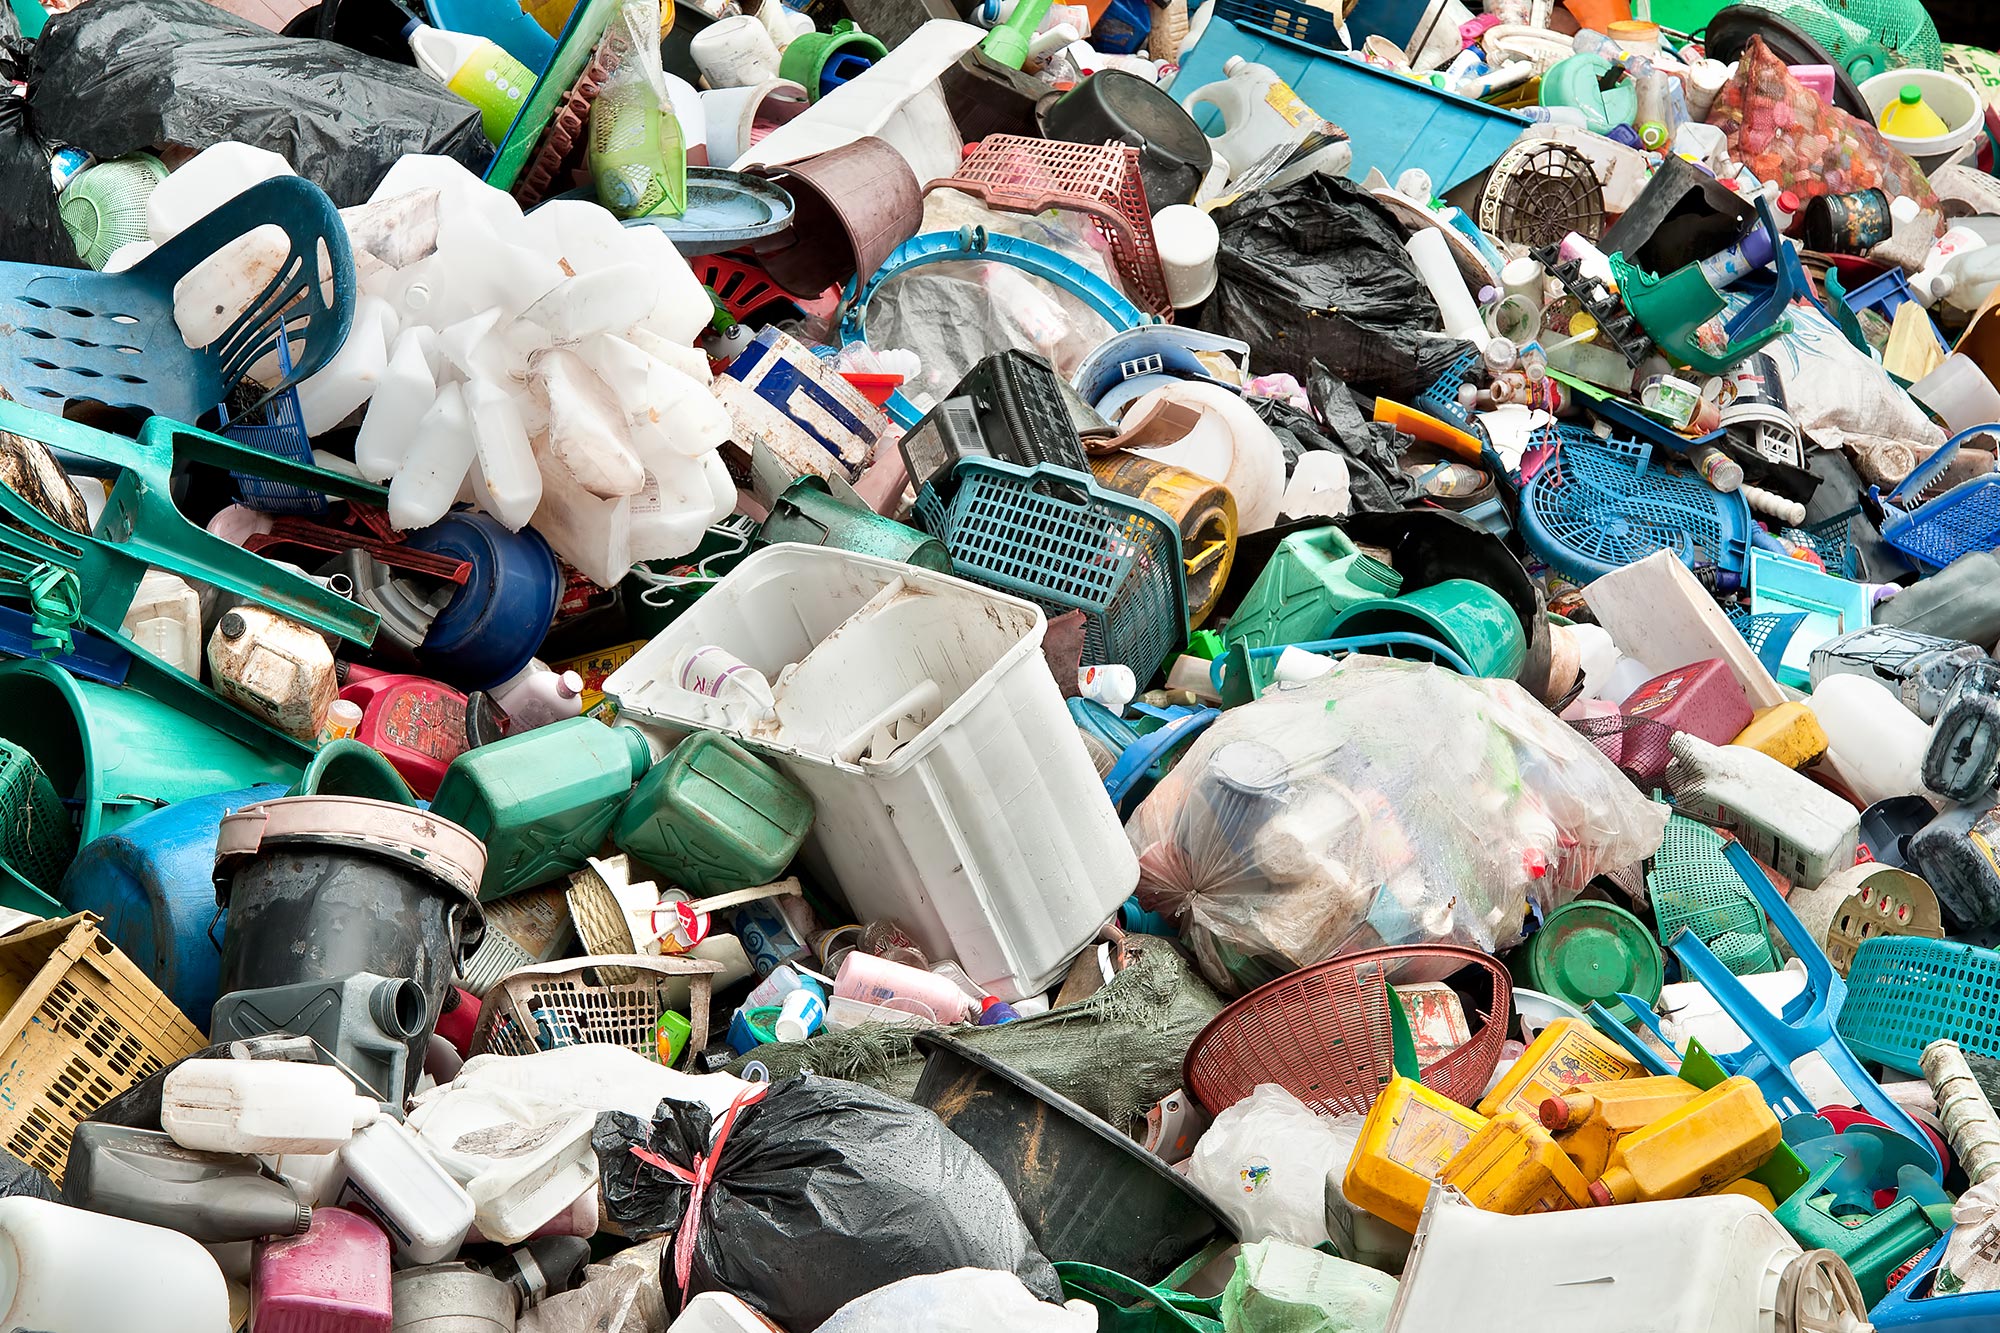 Scientists Estimate That the Embodied Energy of Waste Plastics Equates to 12% of U.S. Industrial Energy Use